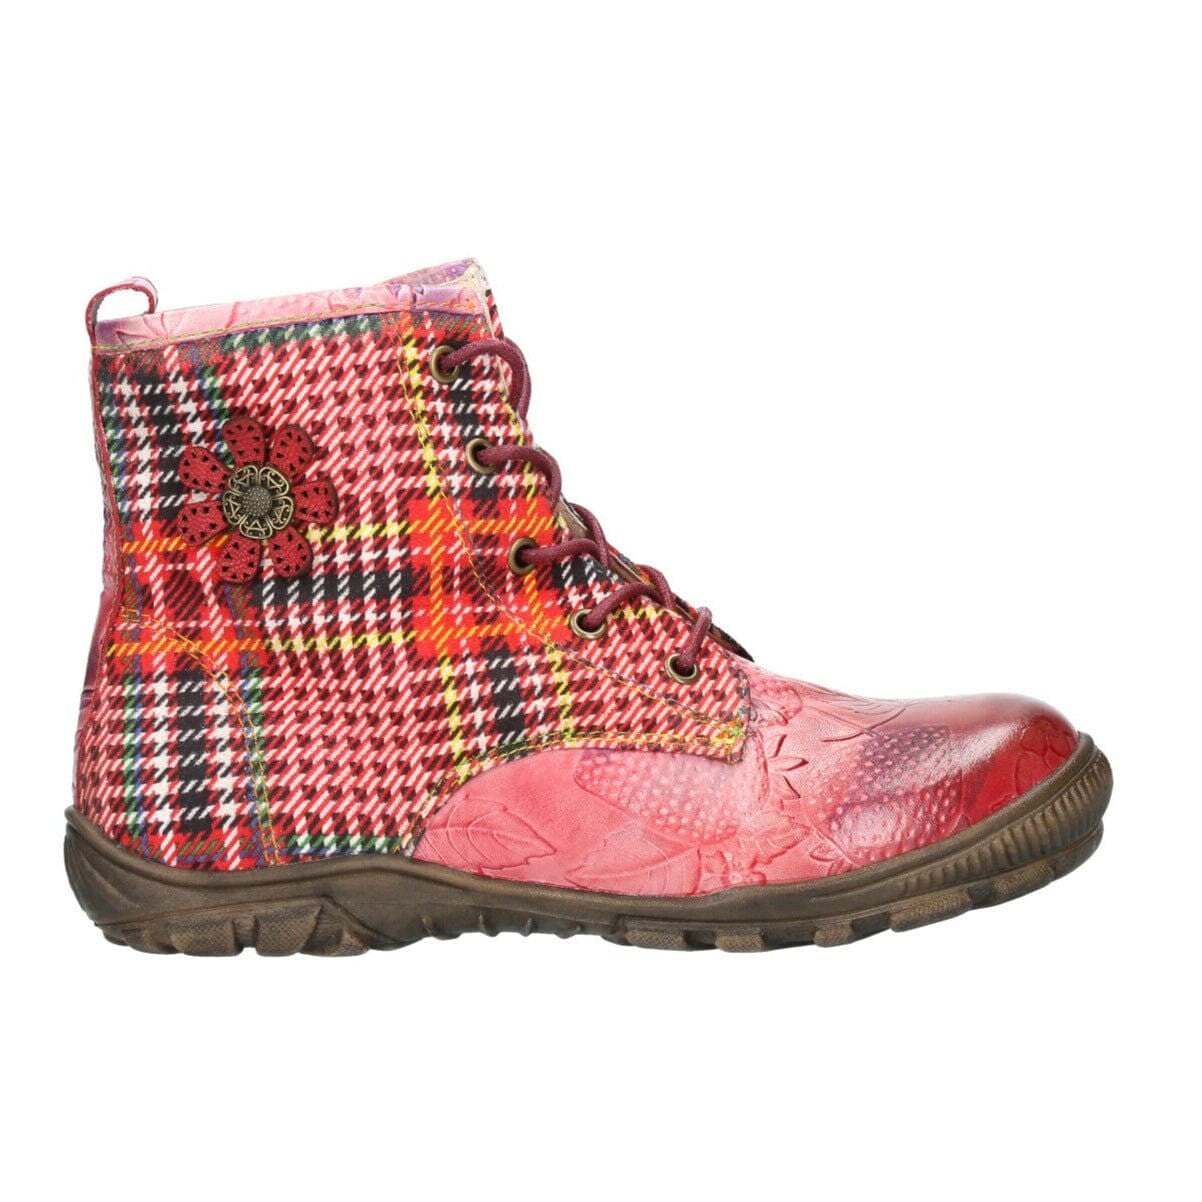 Children's shoe IVCRIAO 01 - Red / 30 - Boots